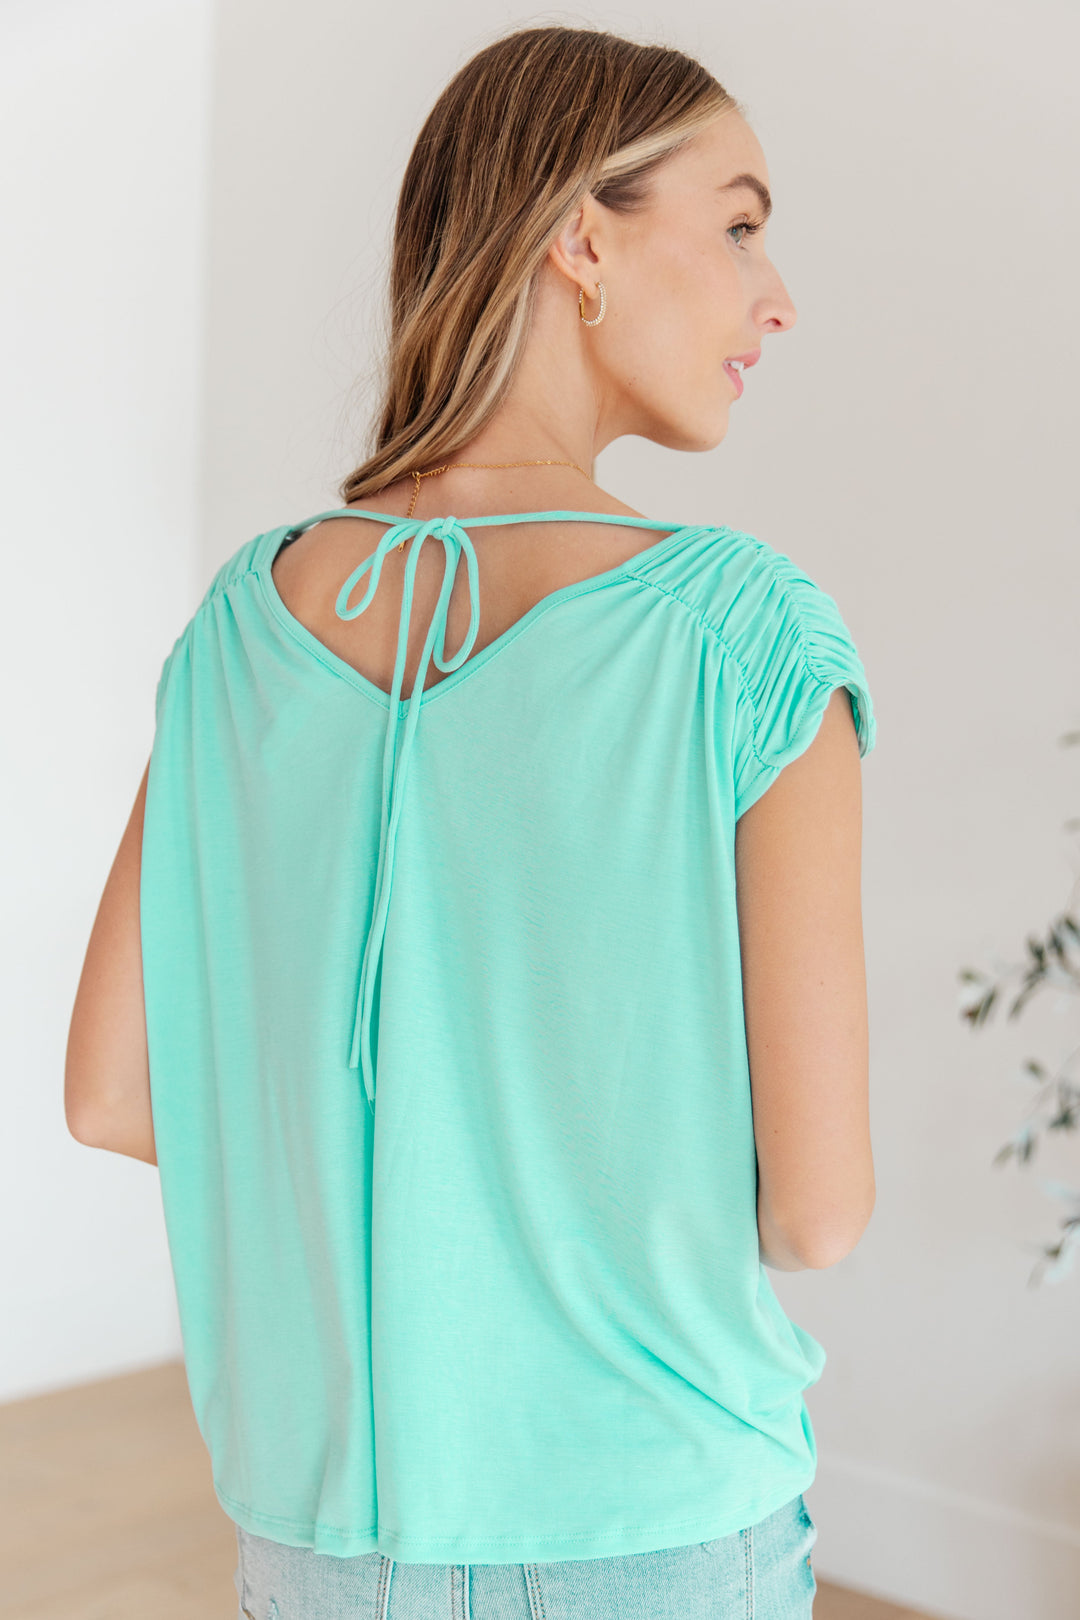 Keeping It Cool - Ruched Top - Neon Blue